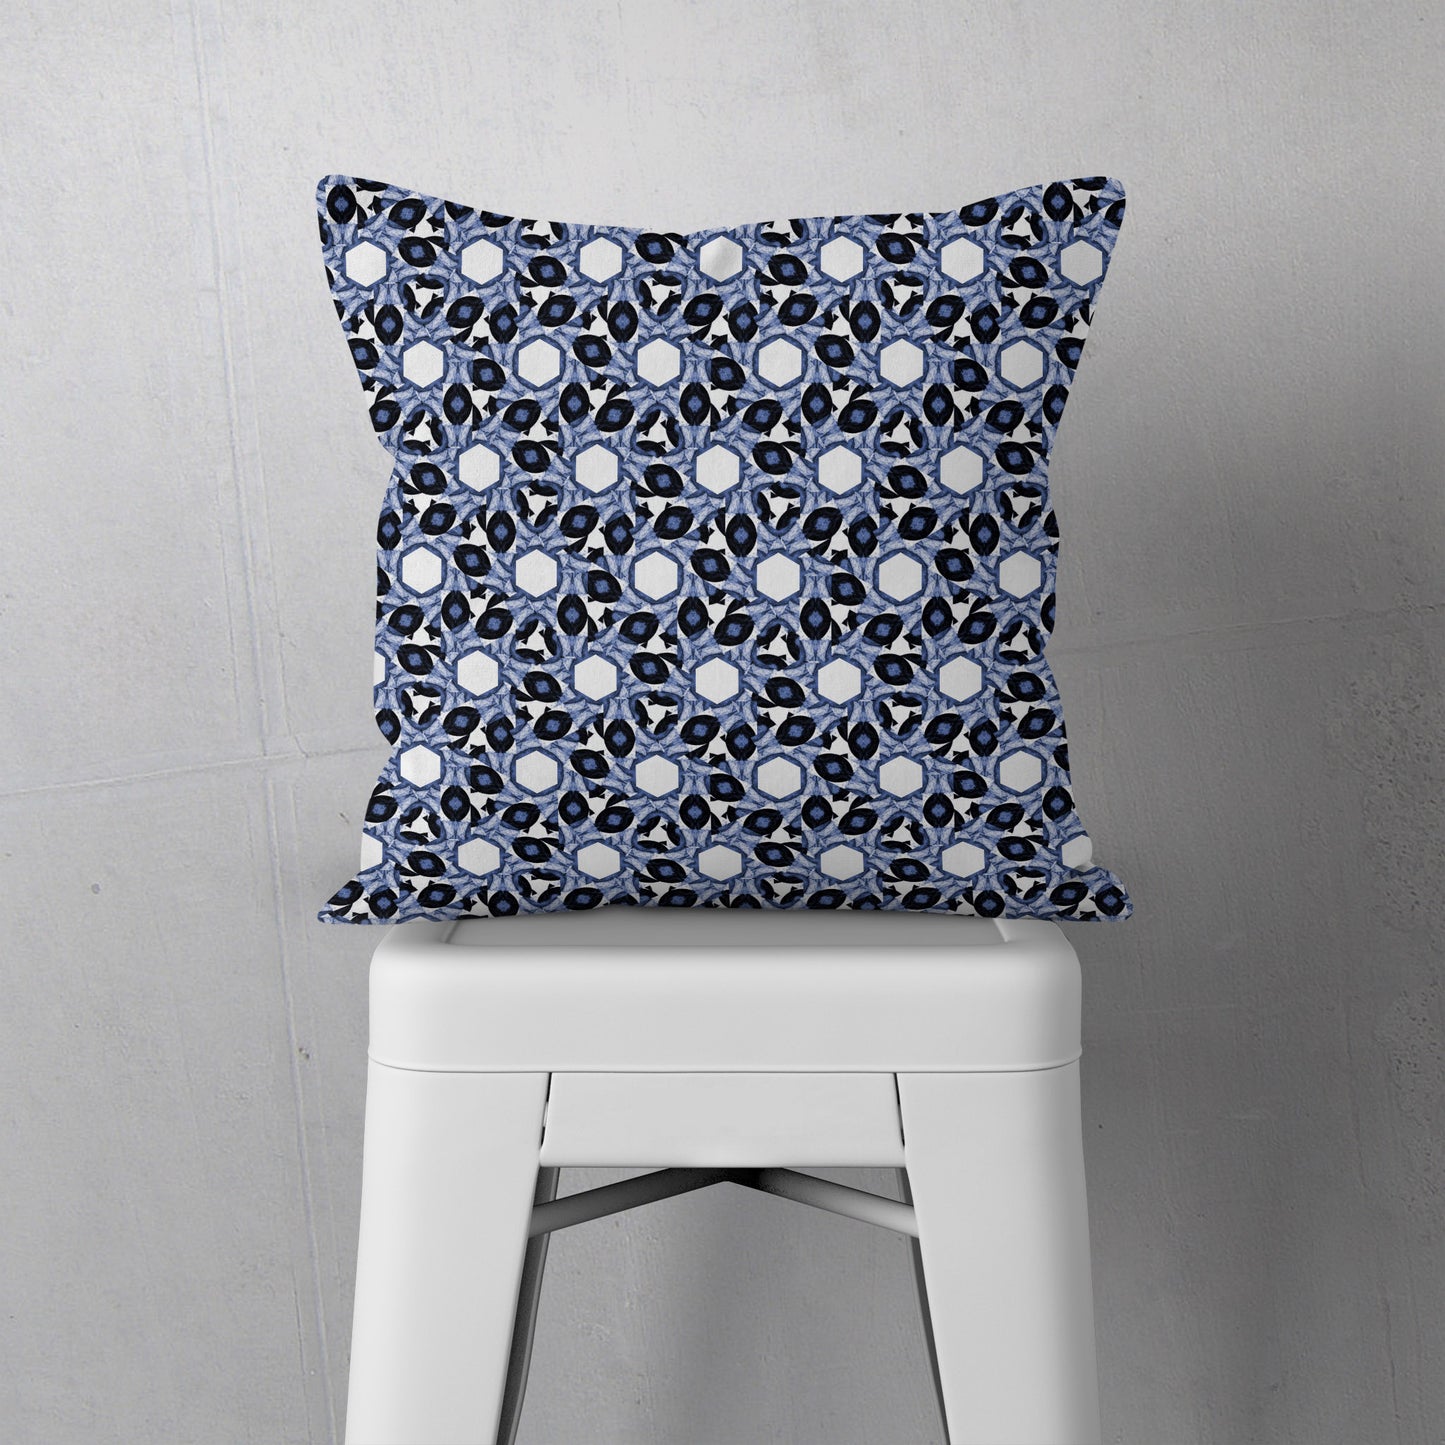 Throw pillow featuring abstract geometric blue and white pattern, sitting on a white metal stool